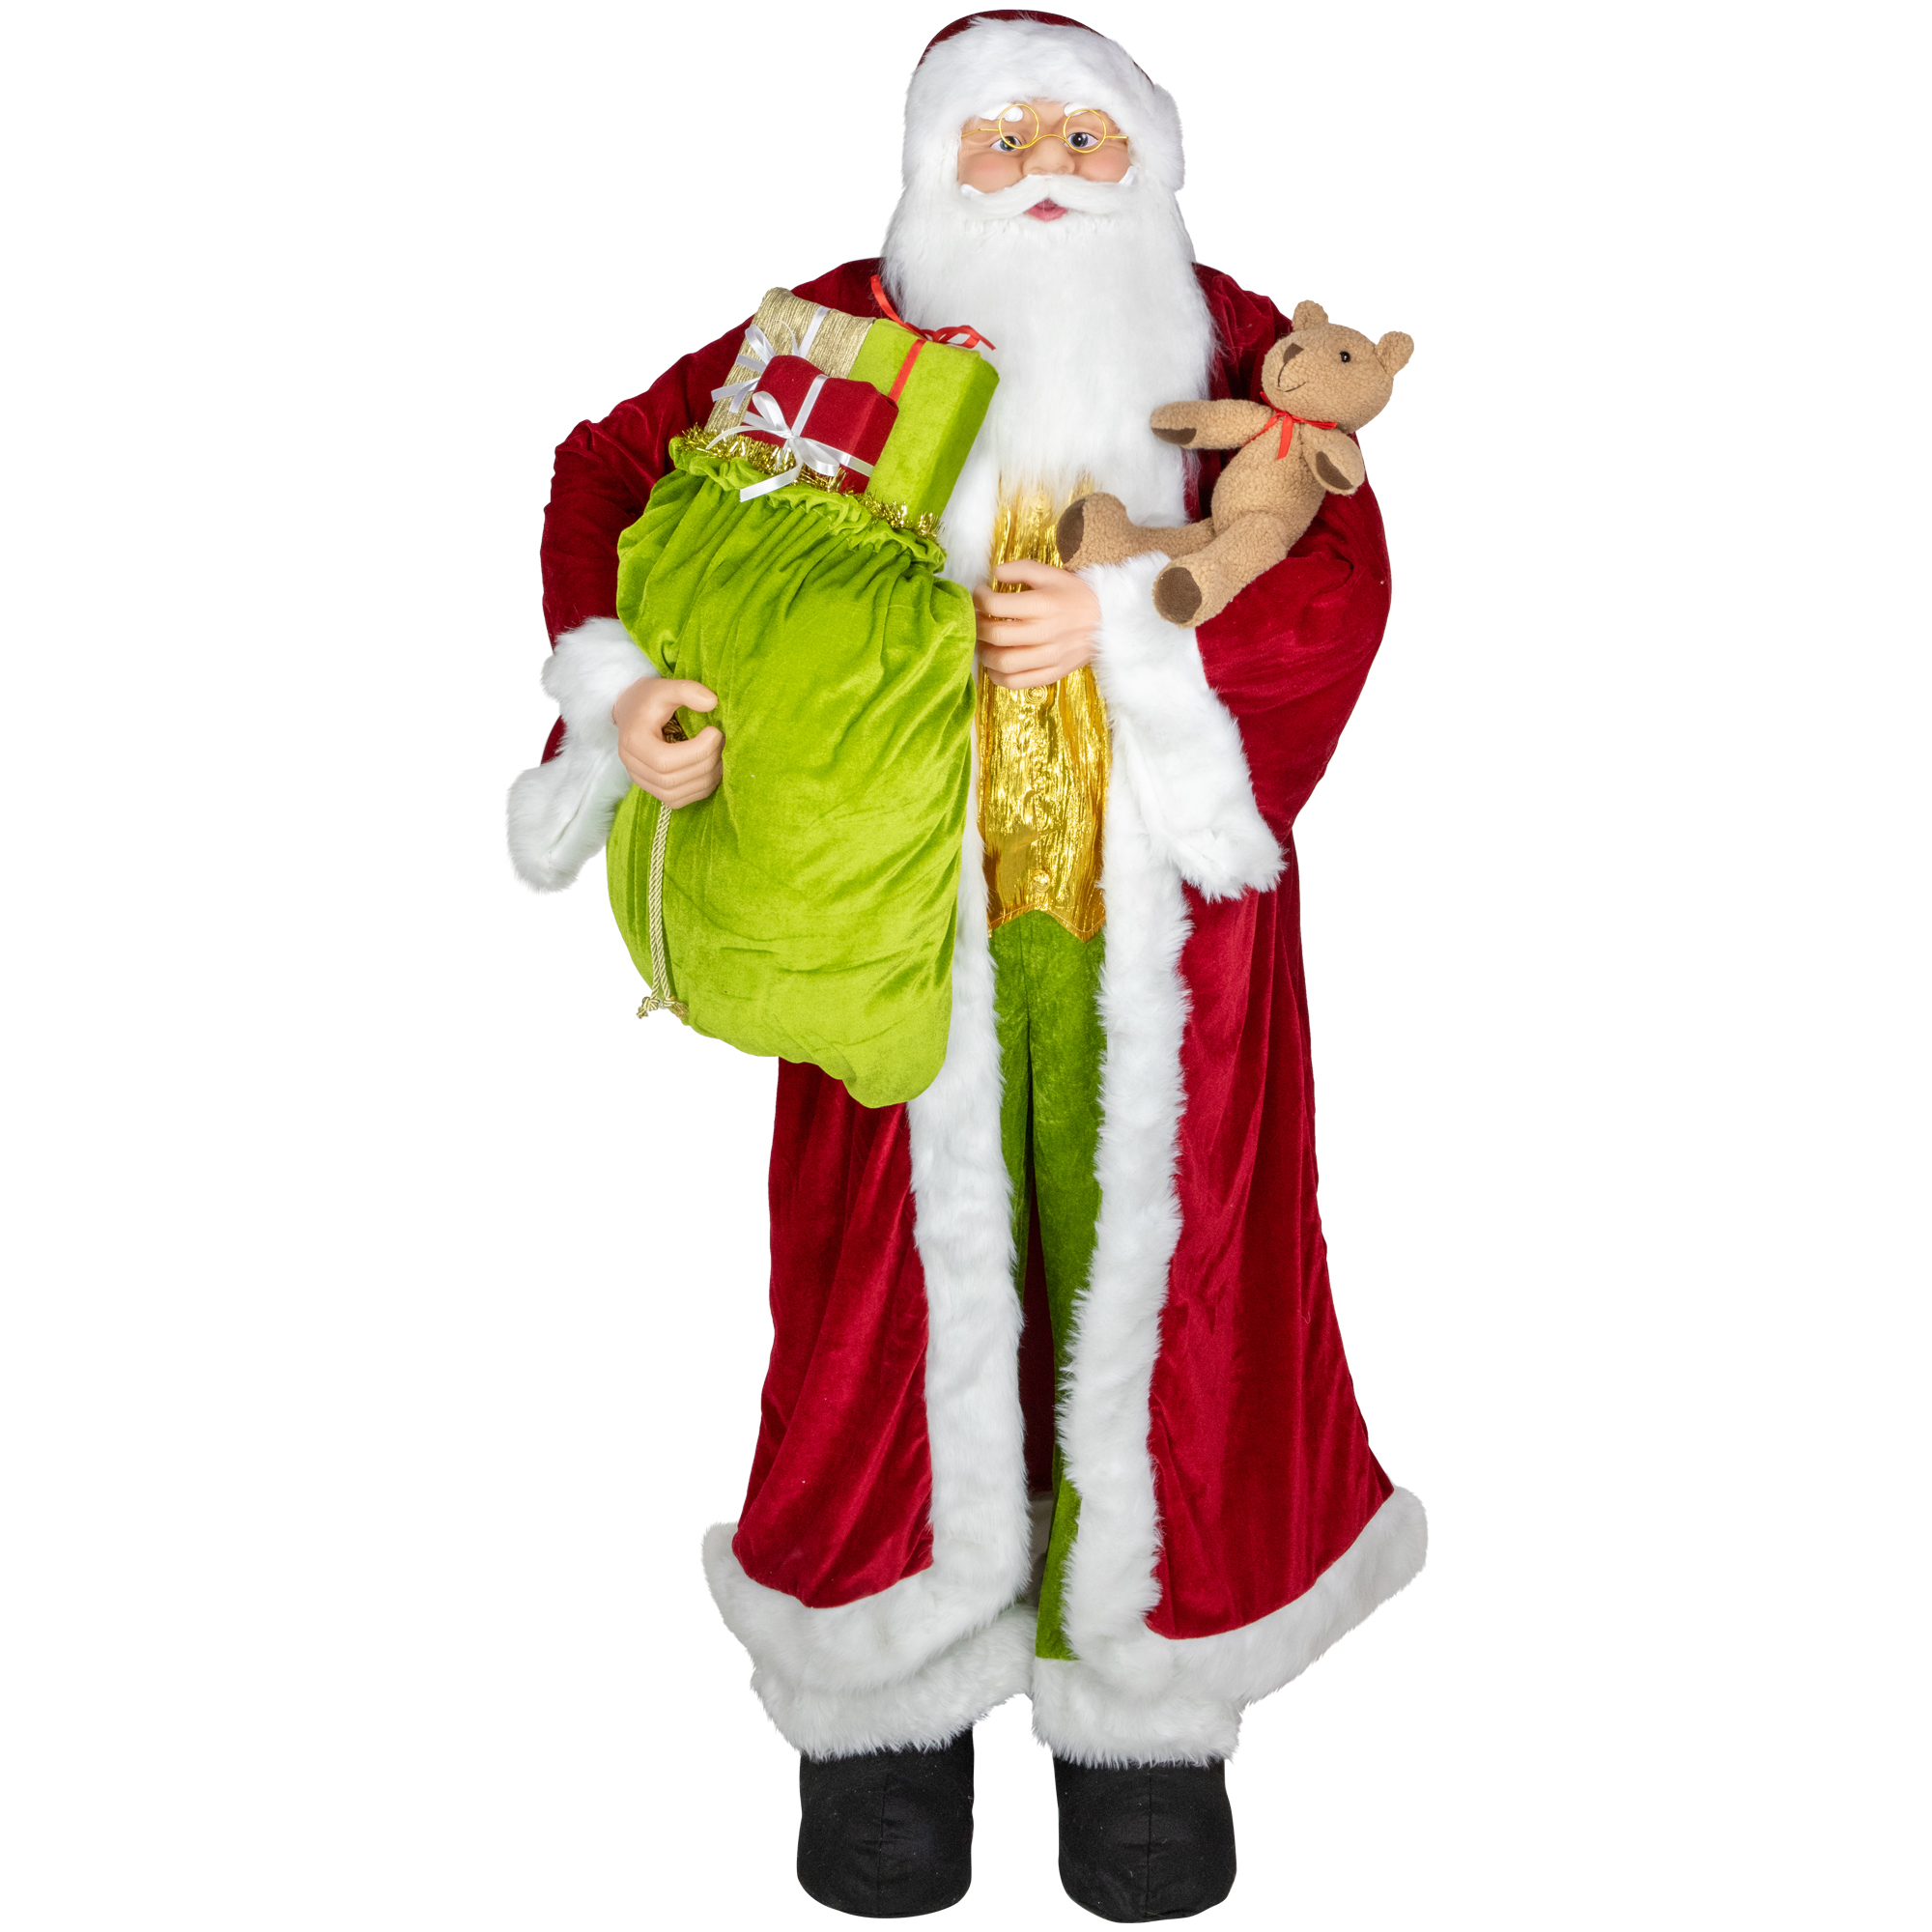 Northlight Plush Santa Claus with Teddy Bear and Gift Bag Christmas Figure - 6' - Red and Green